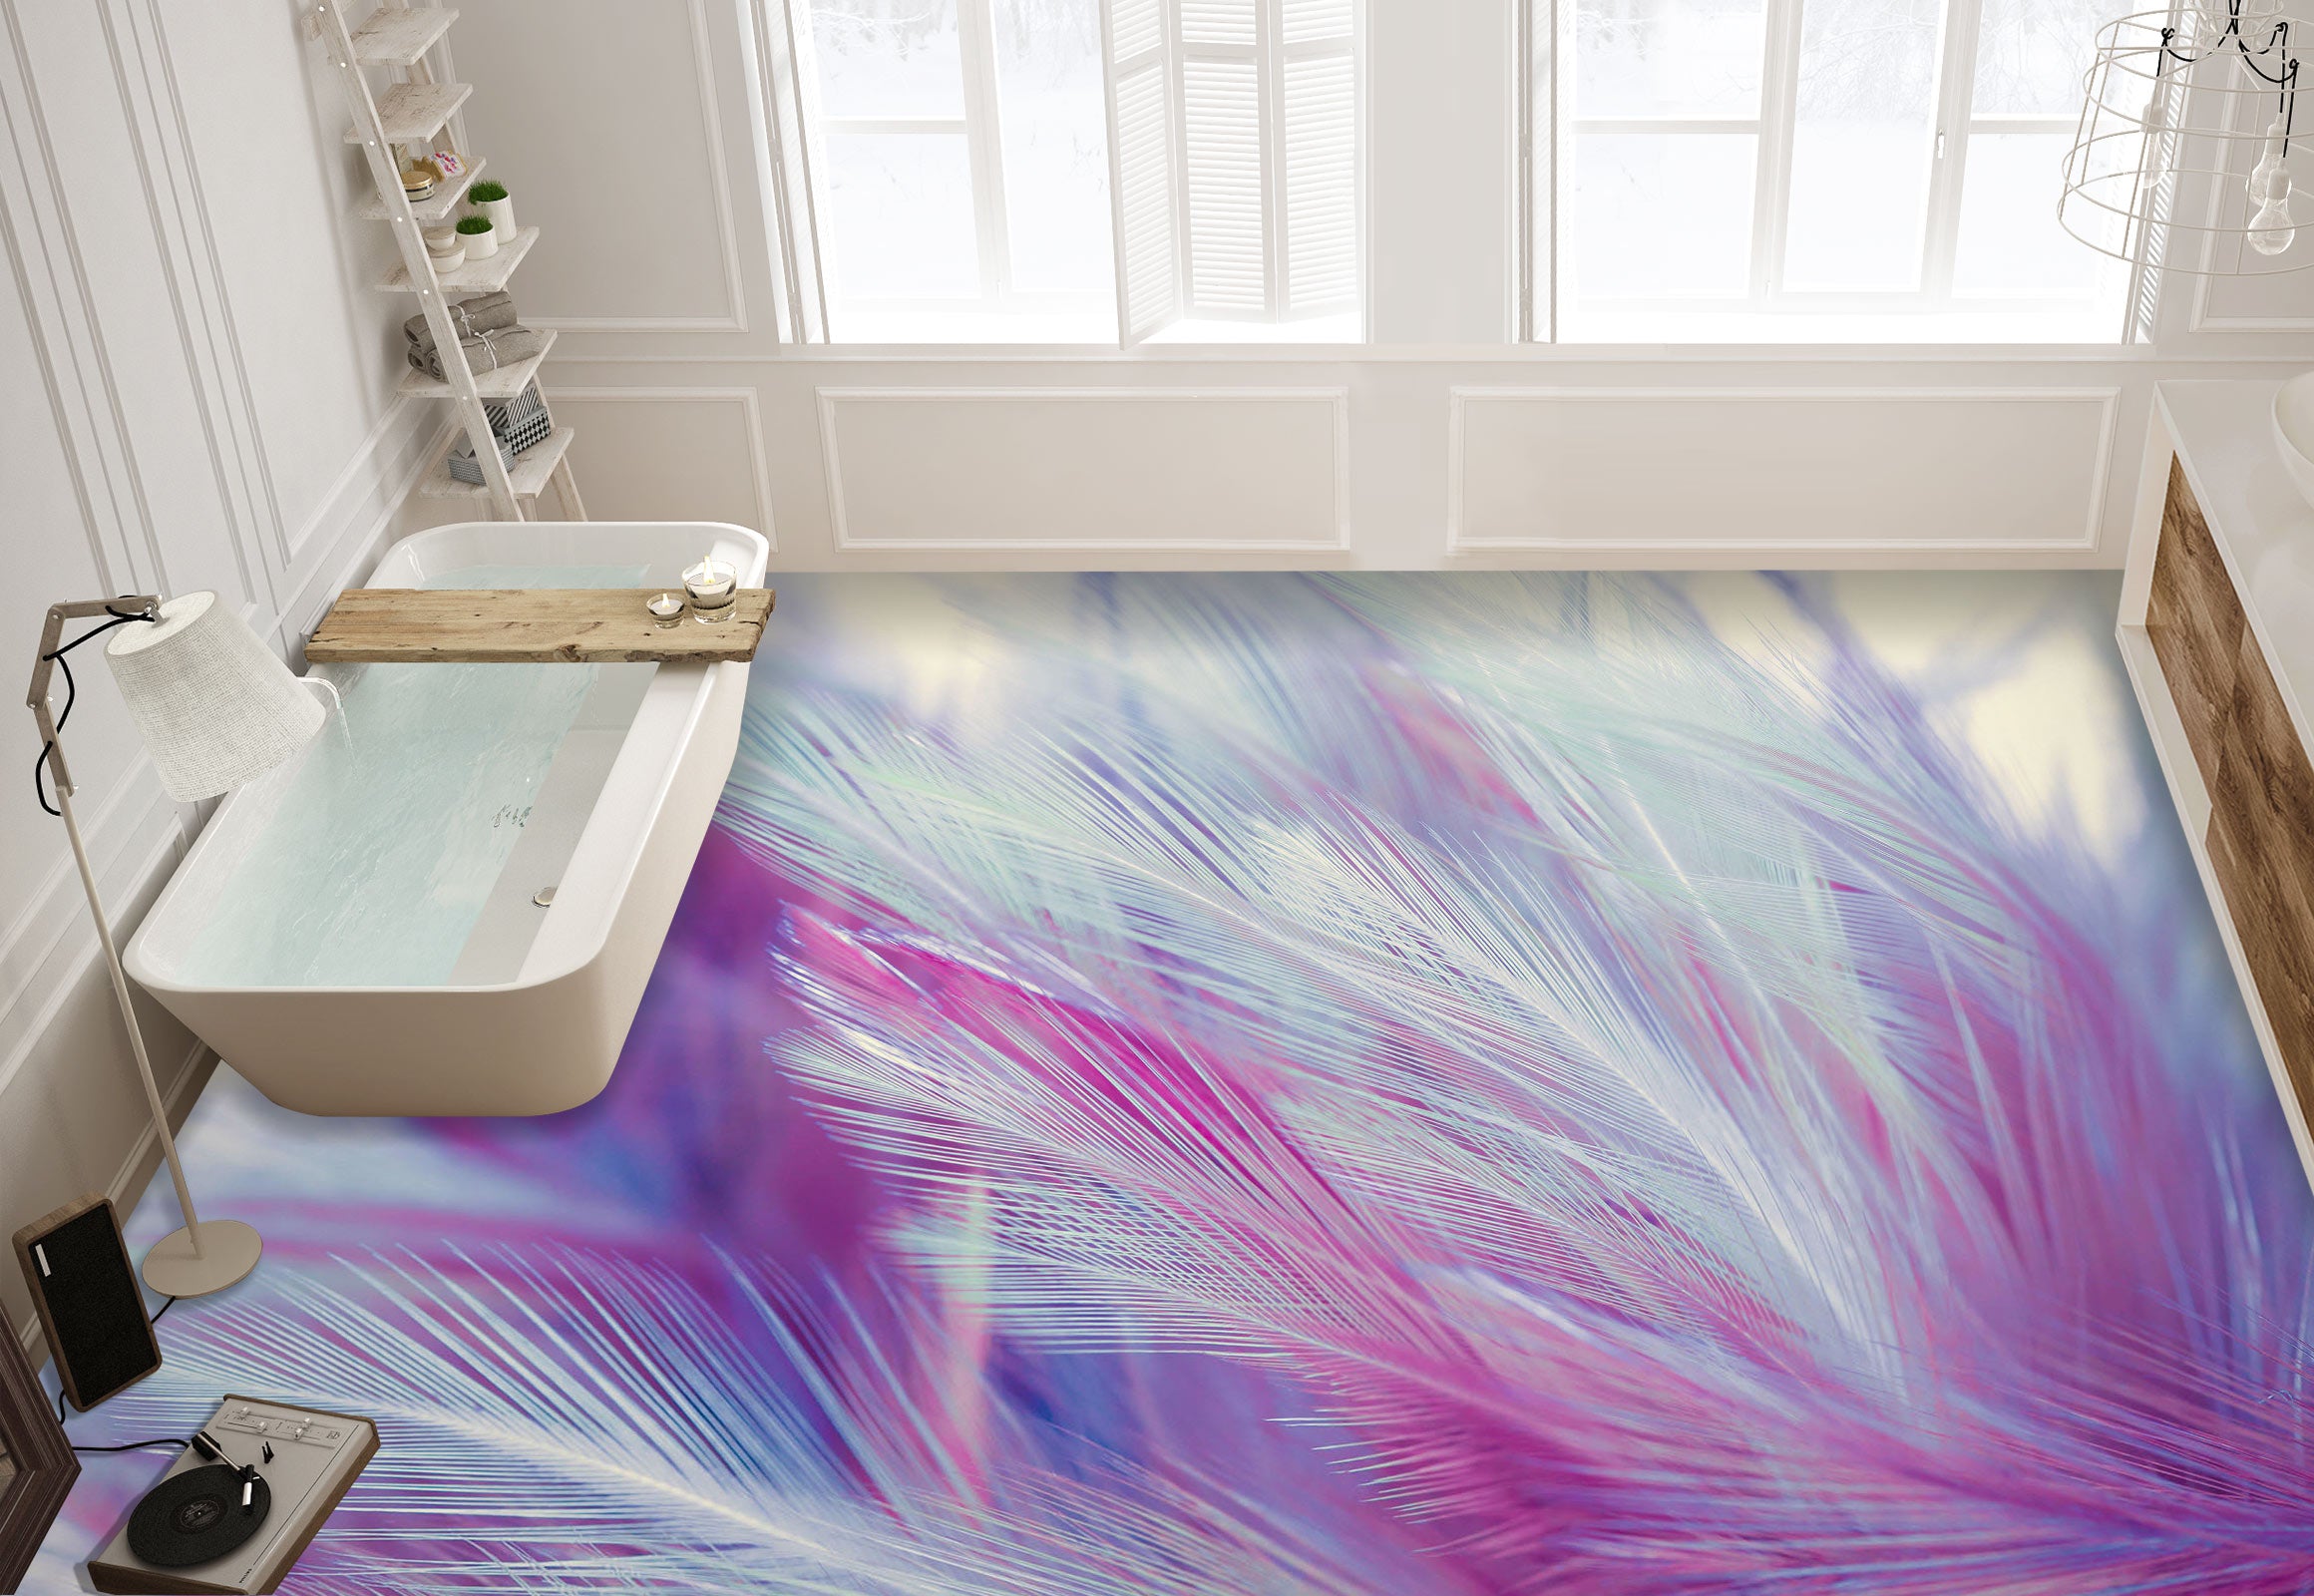 3D Glamour Purple Feathers 1142 Floor Mural  Wallpaper Murals Self-Adhesive Removable Print Epoxy